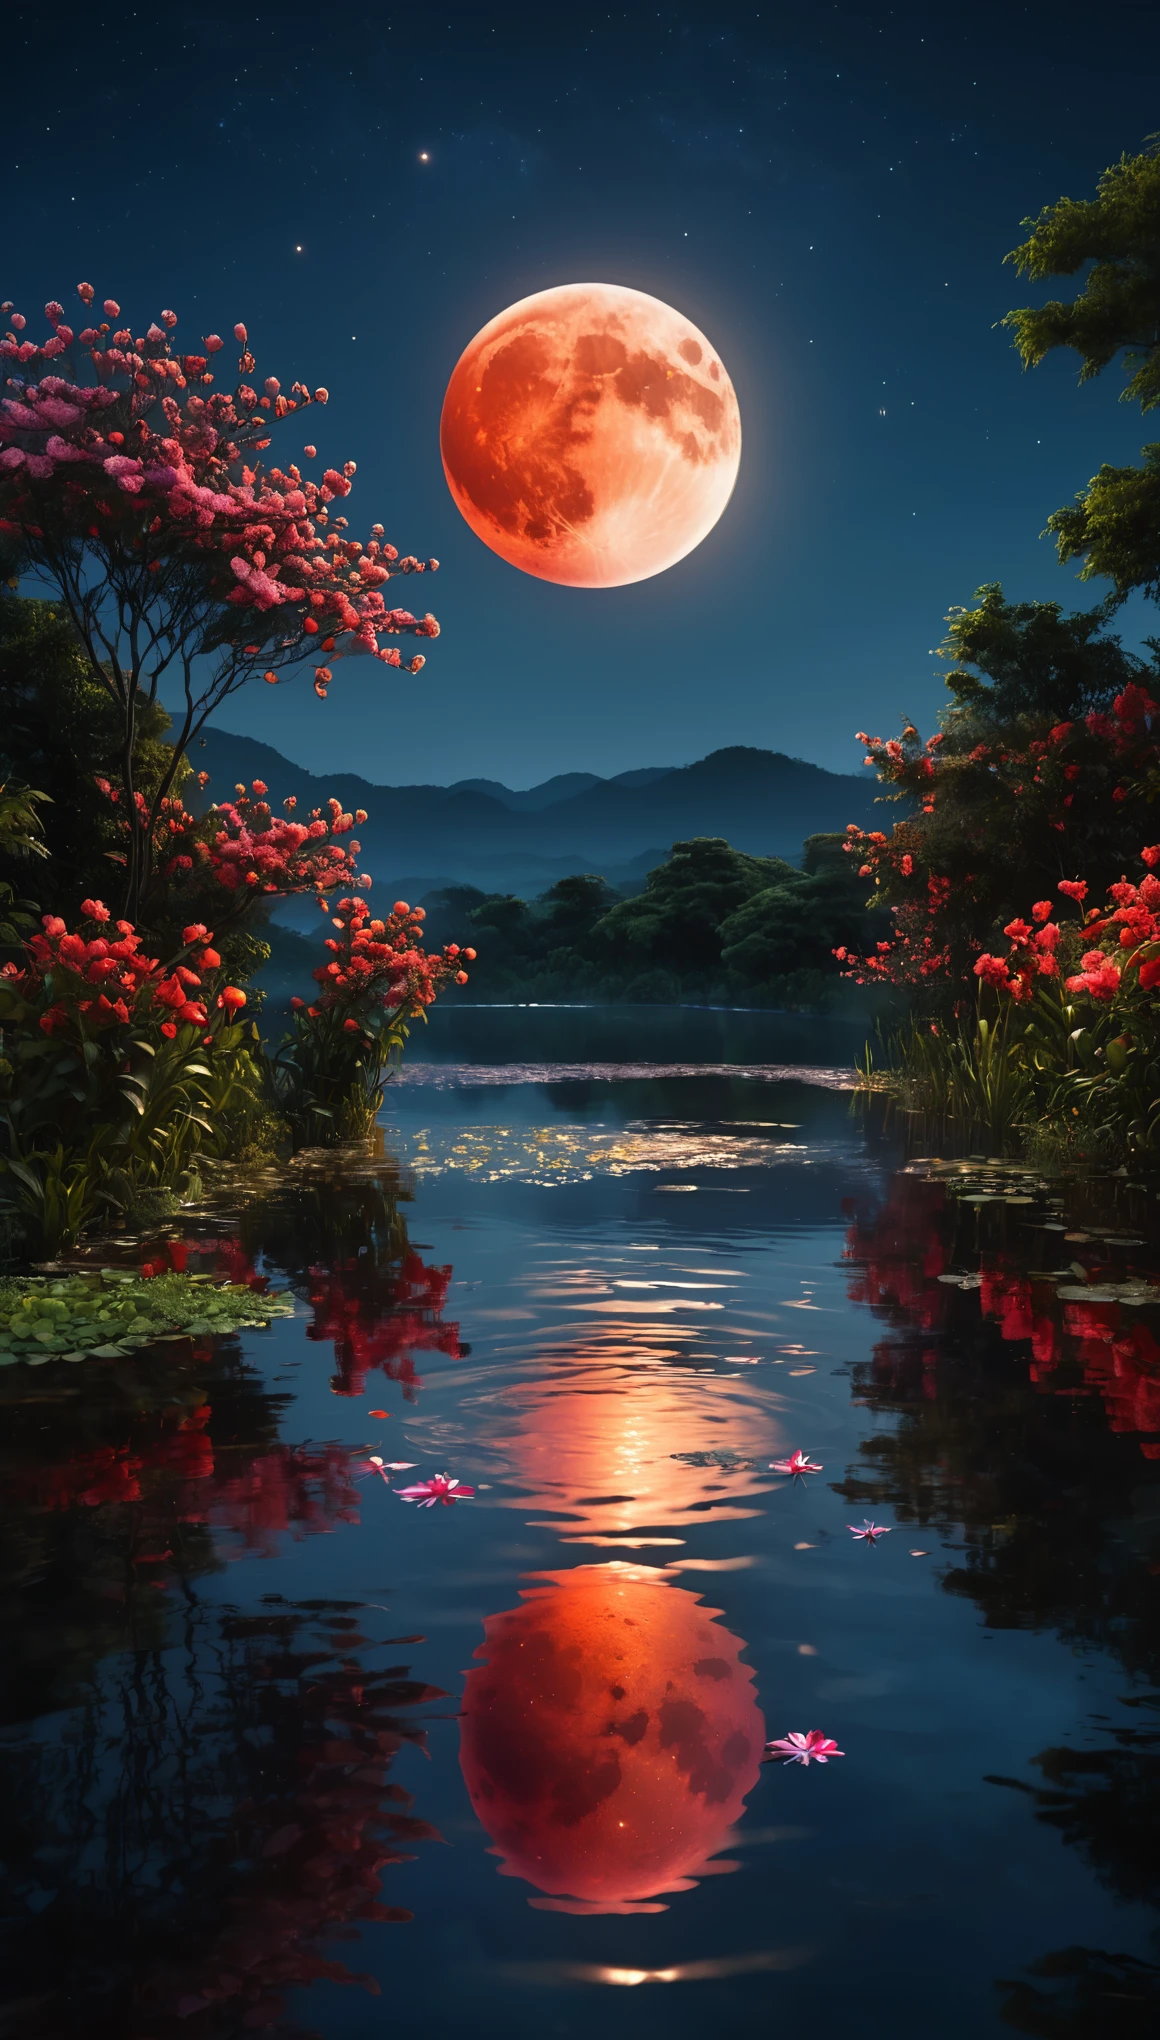 best quality,highres,masterpiece:1.2,ultra-detailed,realistic:1.37,red moon reflected in water,symmetrical scene,serene atmosphere,glistening water surface,tranquil garden setting,glowing red moon,crimson moonlight,dark silhouettes of trees,twinkling stars in the night sky,pure reflection of the moon in the calm water,peaceful and ethereal mood,meticulously detailed moon surface,colorful flowers in bloom,delicate ripples on the water,soft moonlight illuminating the surroundings,calm and stillness,water shimmering with the moon's reflection,mystical and enchanting ambiance